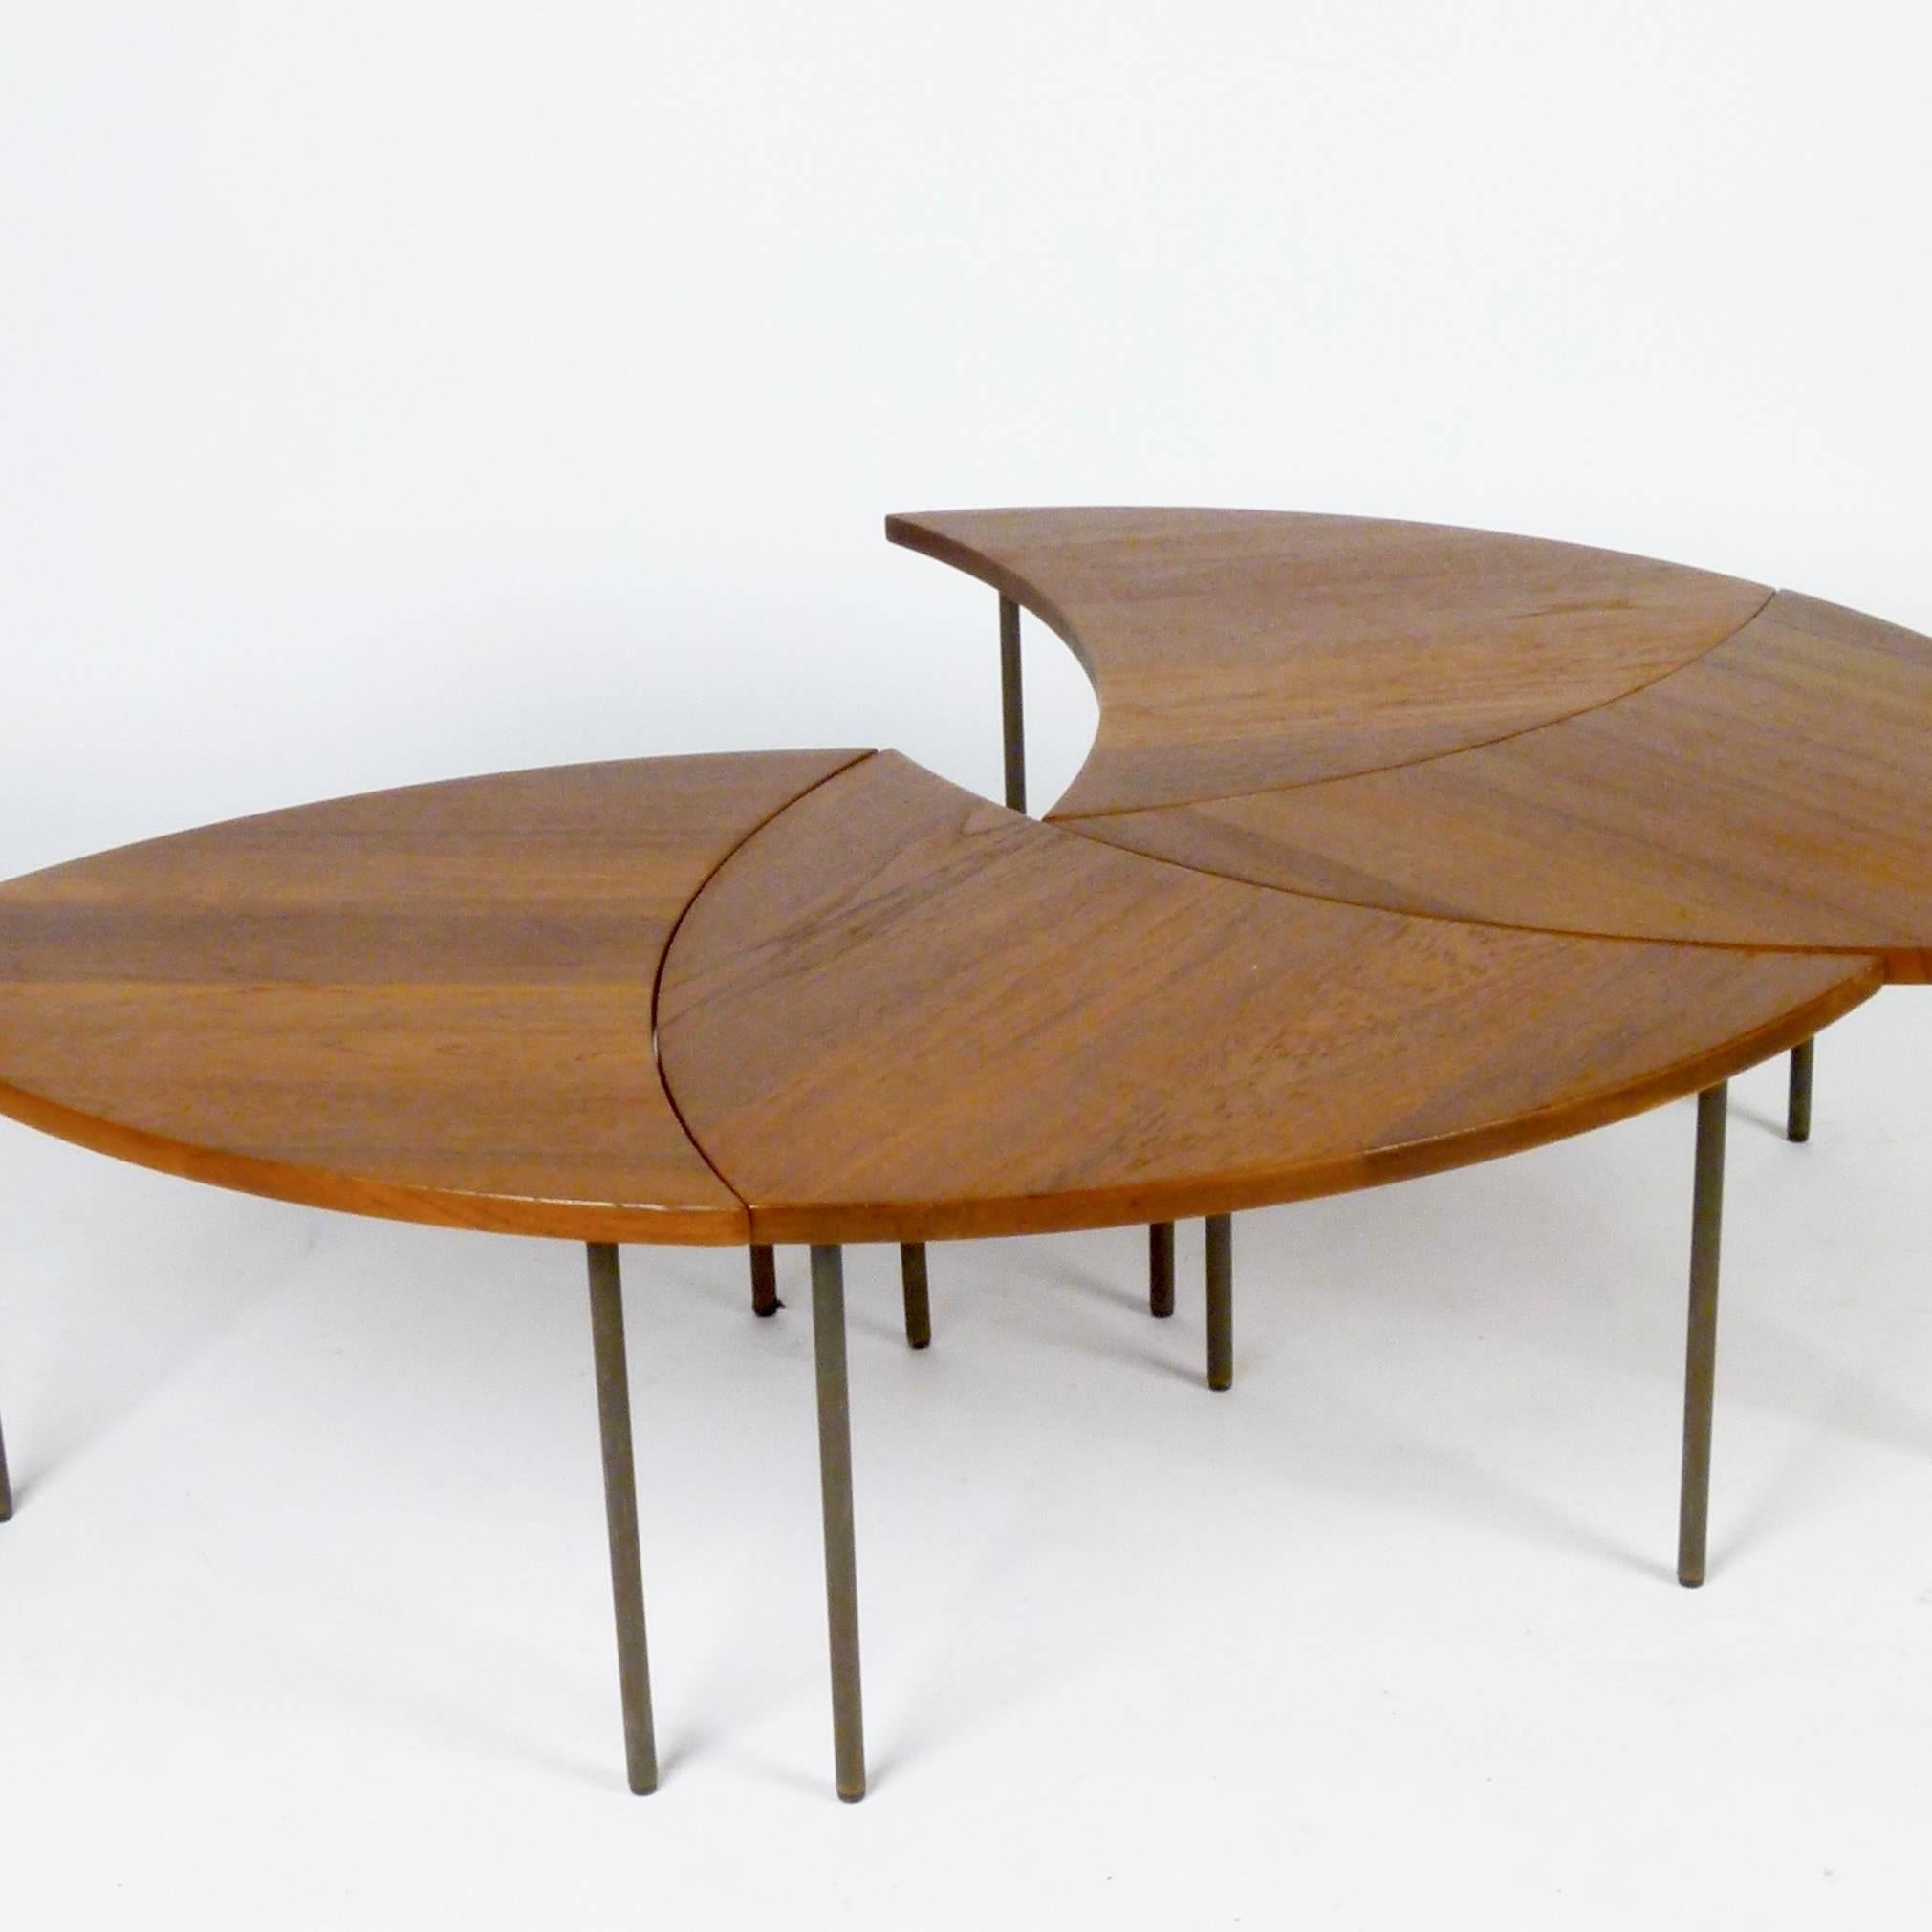 Set of four very early examples of this scarce table designed by Peter Hvidt & Orla Molgaard Neilsen for France & Daverkosen, Denmark, circa 1954. They can fit together to make a coffee table or be used independently as side tables. Simple,